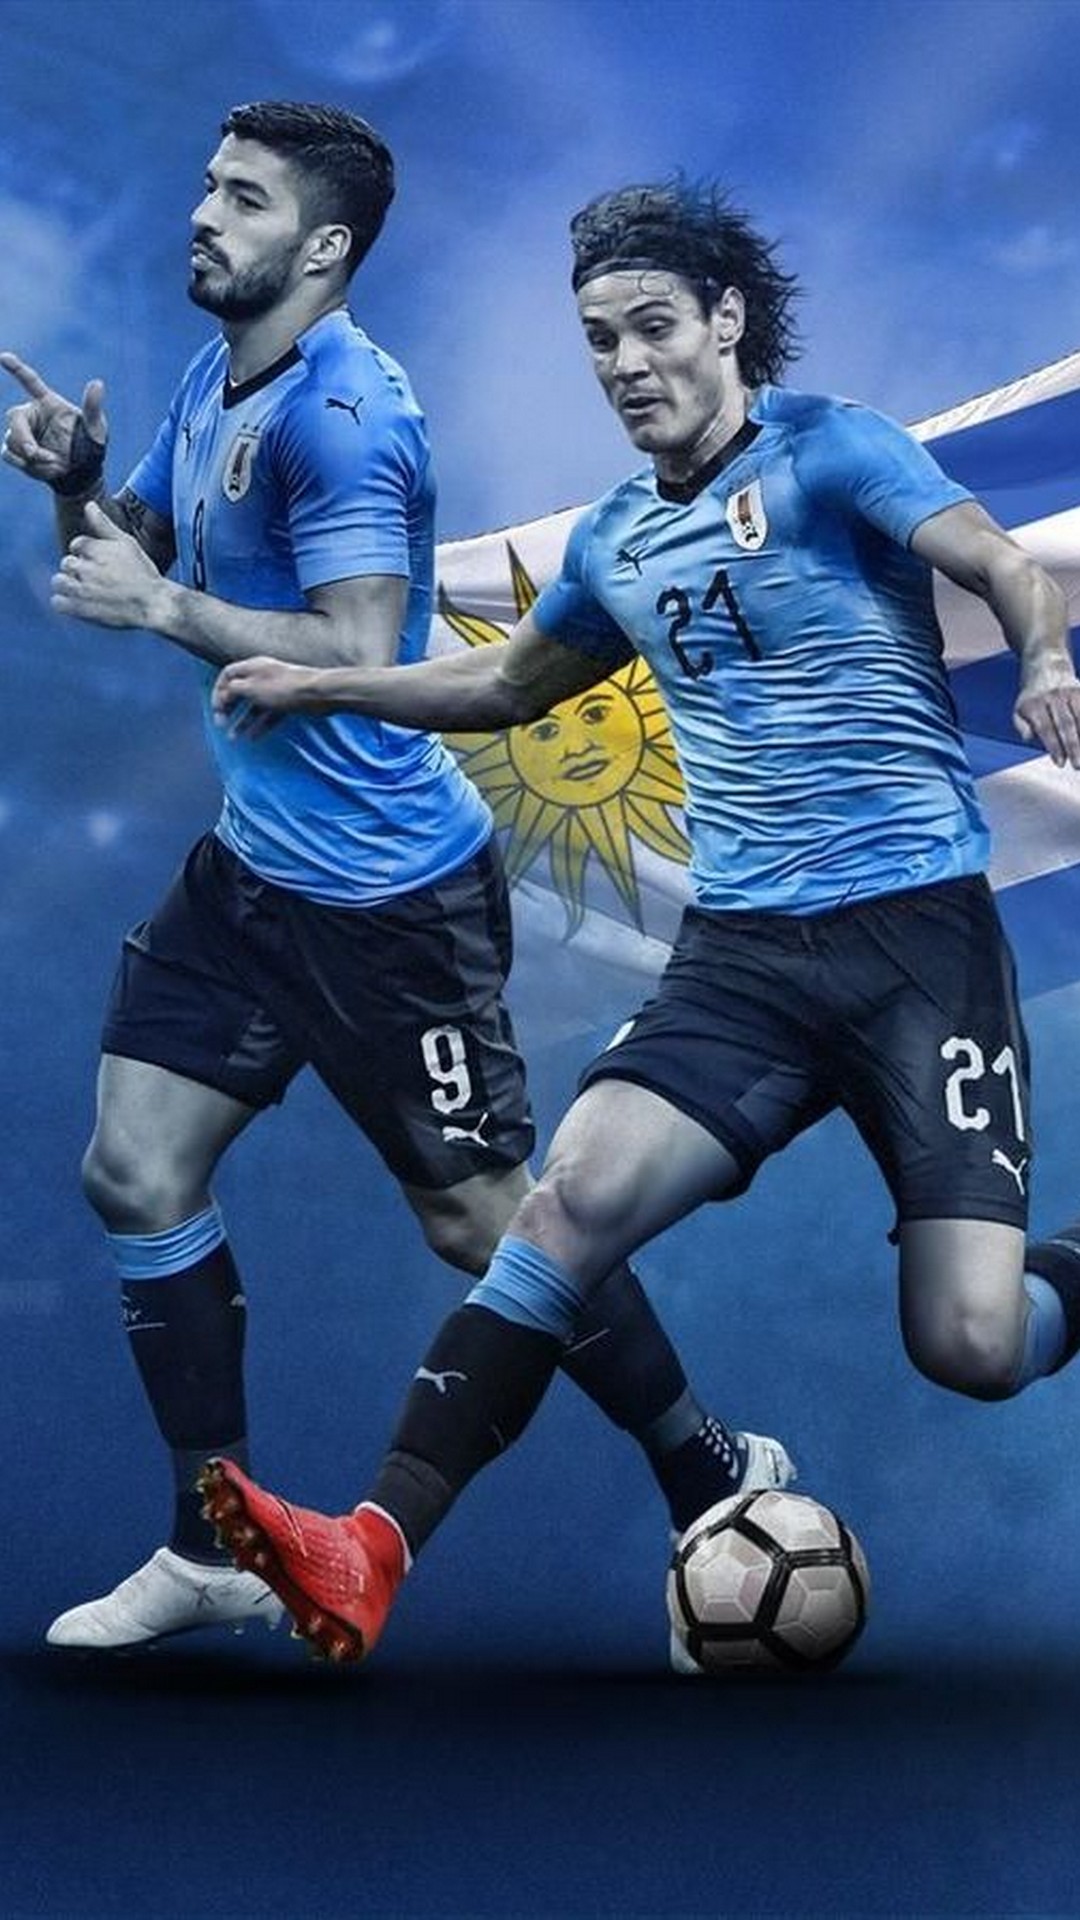 iPhone Wallpaper Uruguay National Team with image resolution 1080x1920 pixel. You can make this wallpaper for your iPhone 5, 6, 7, 8, X backgrounds, Mobile Screensaver, or iPad Lock Screen